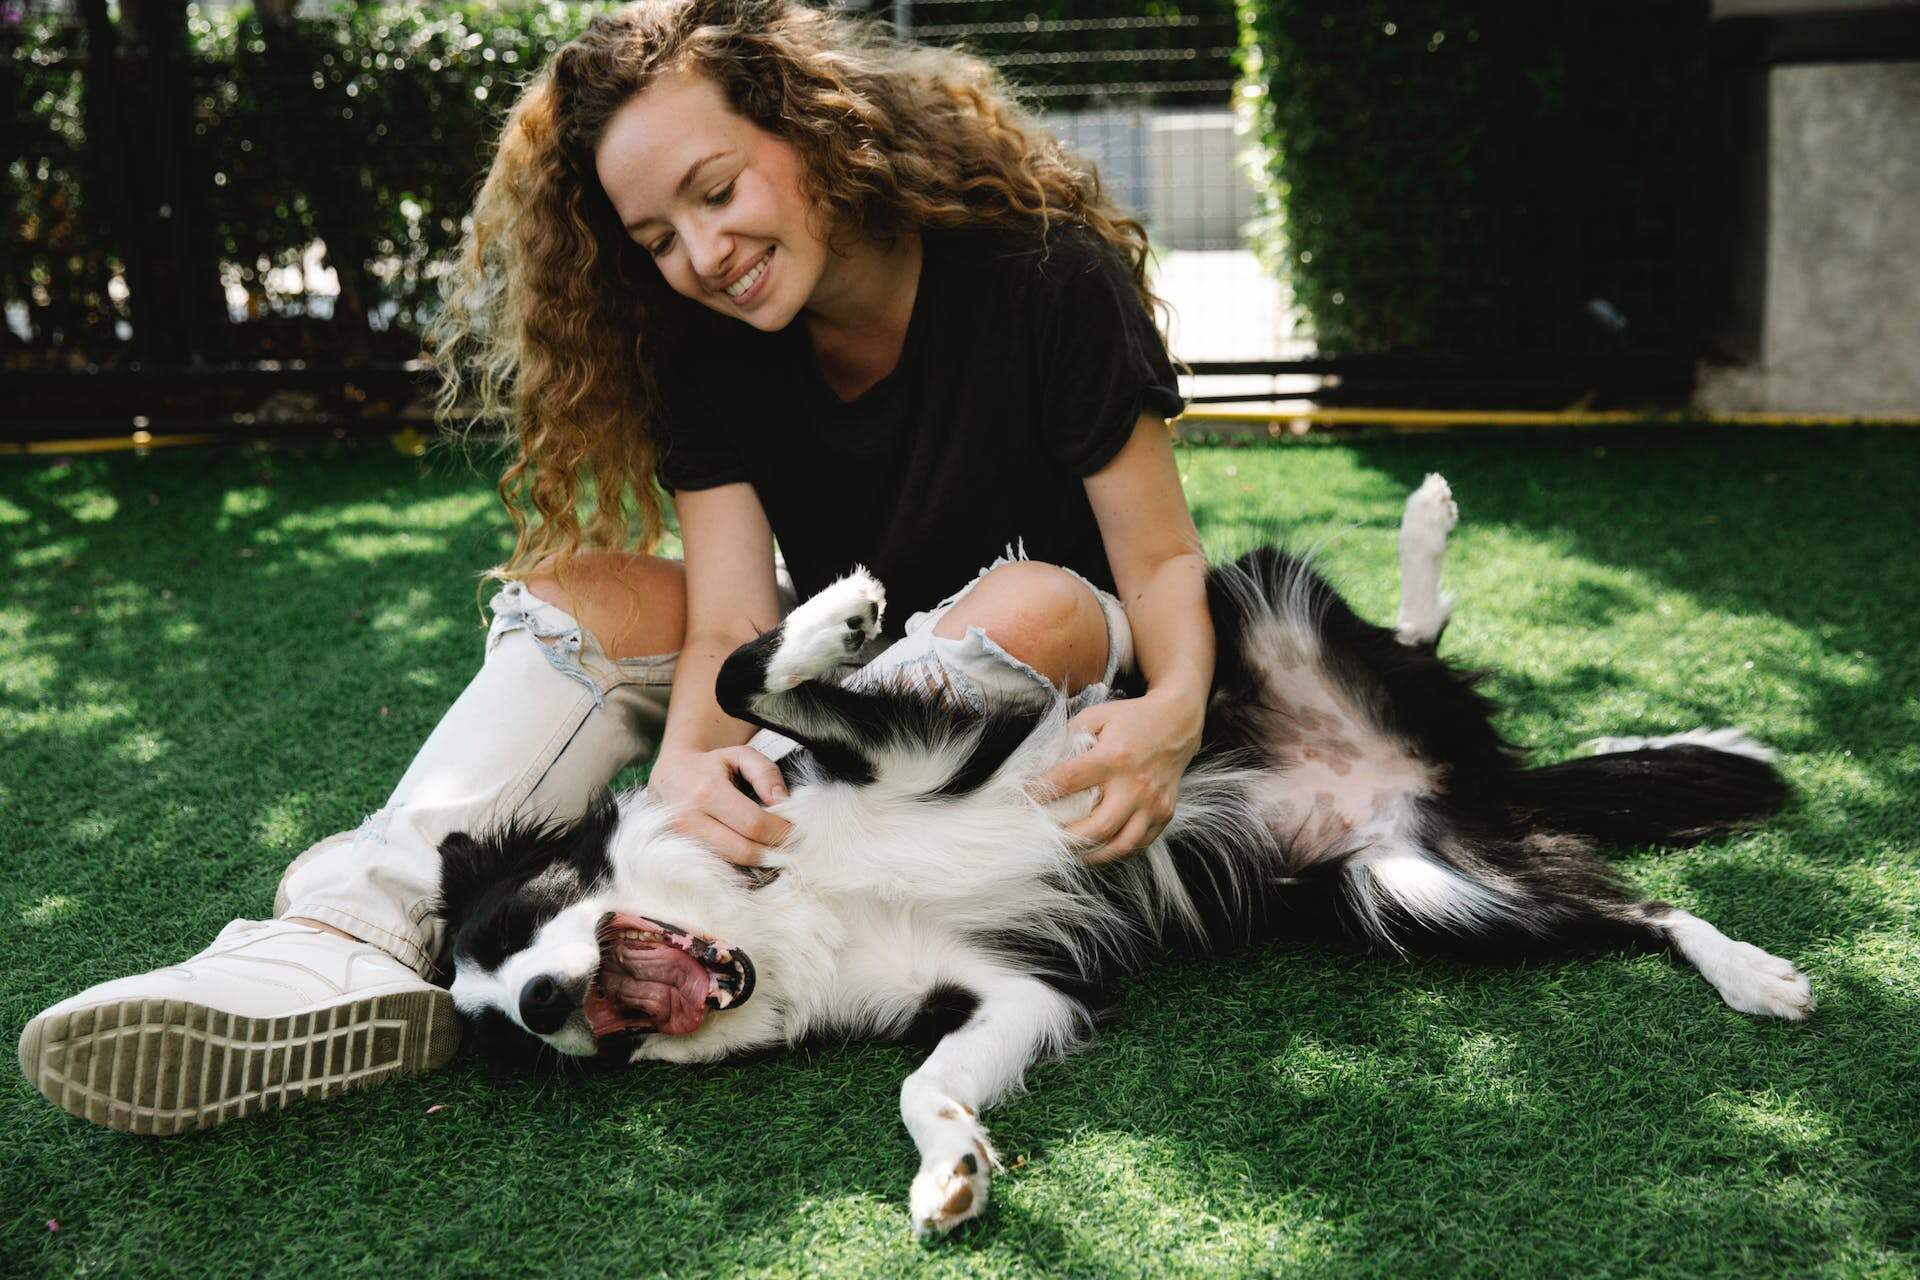 A woman playing with a Border Collie in a lawn